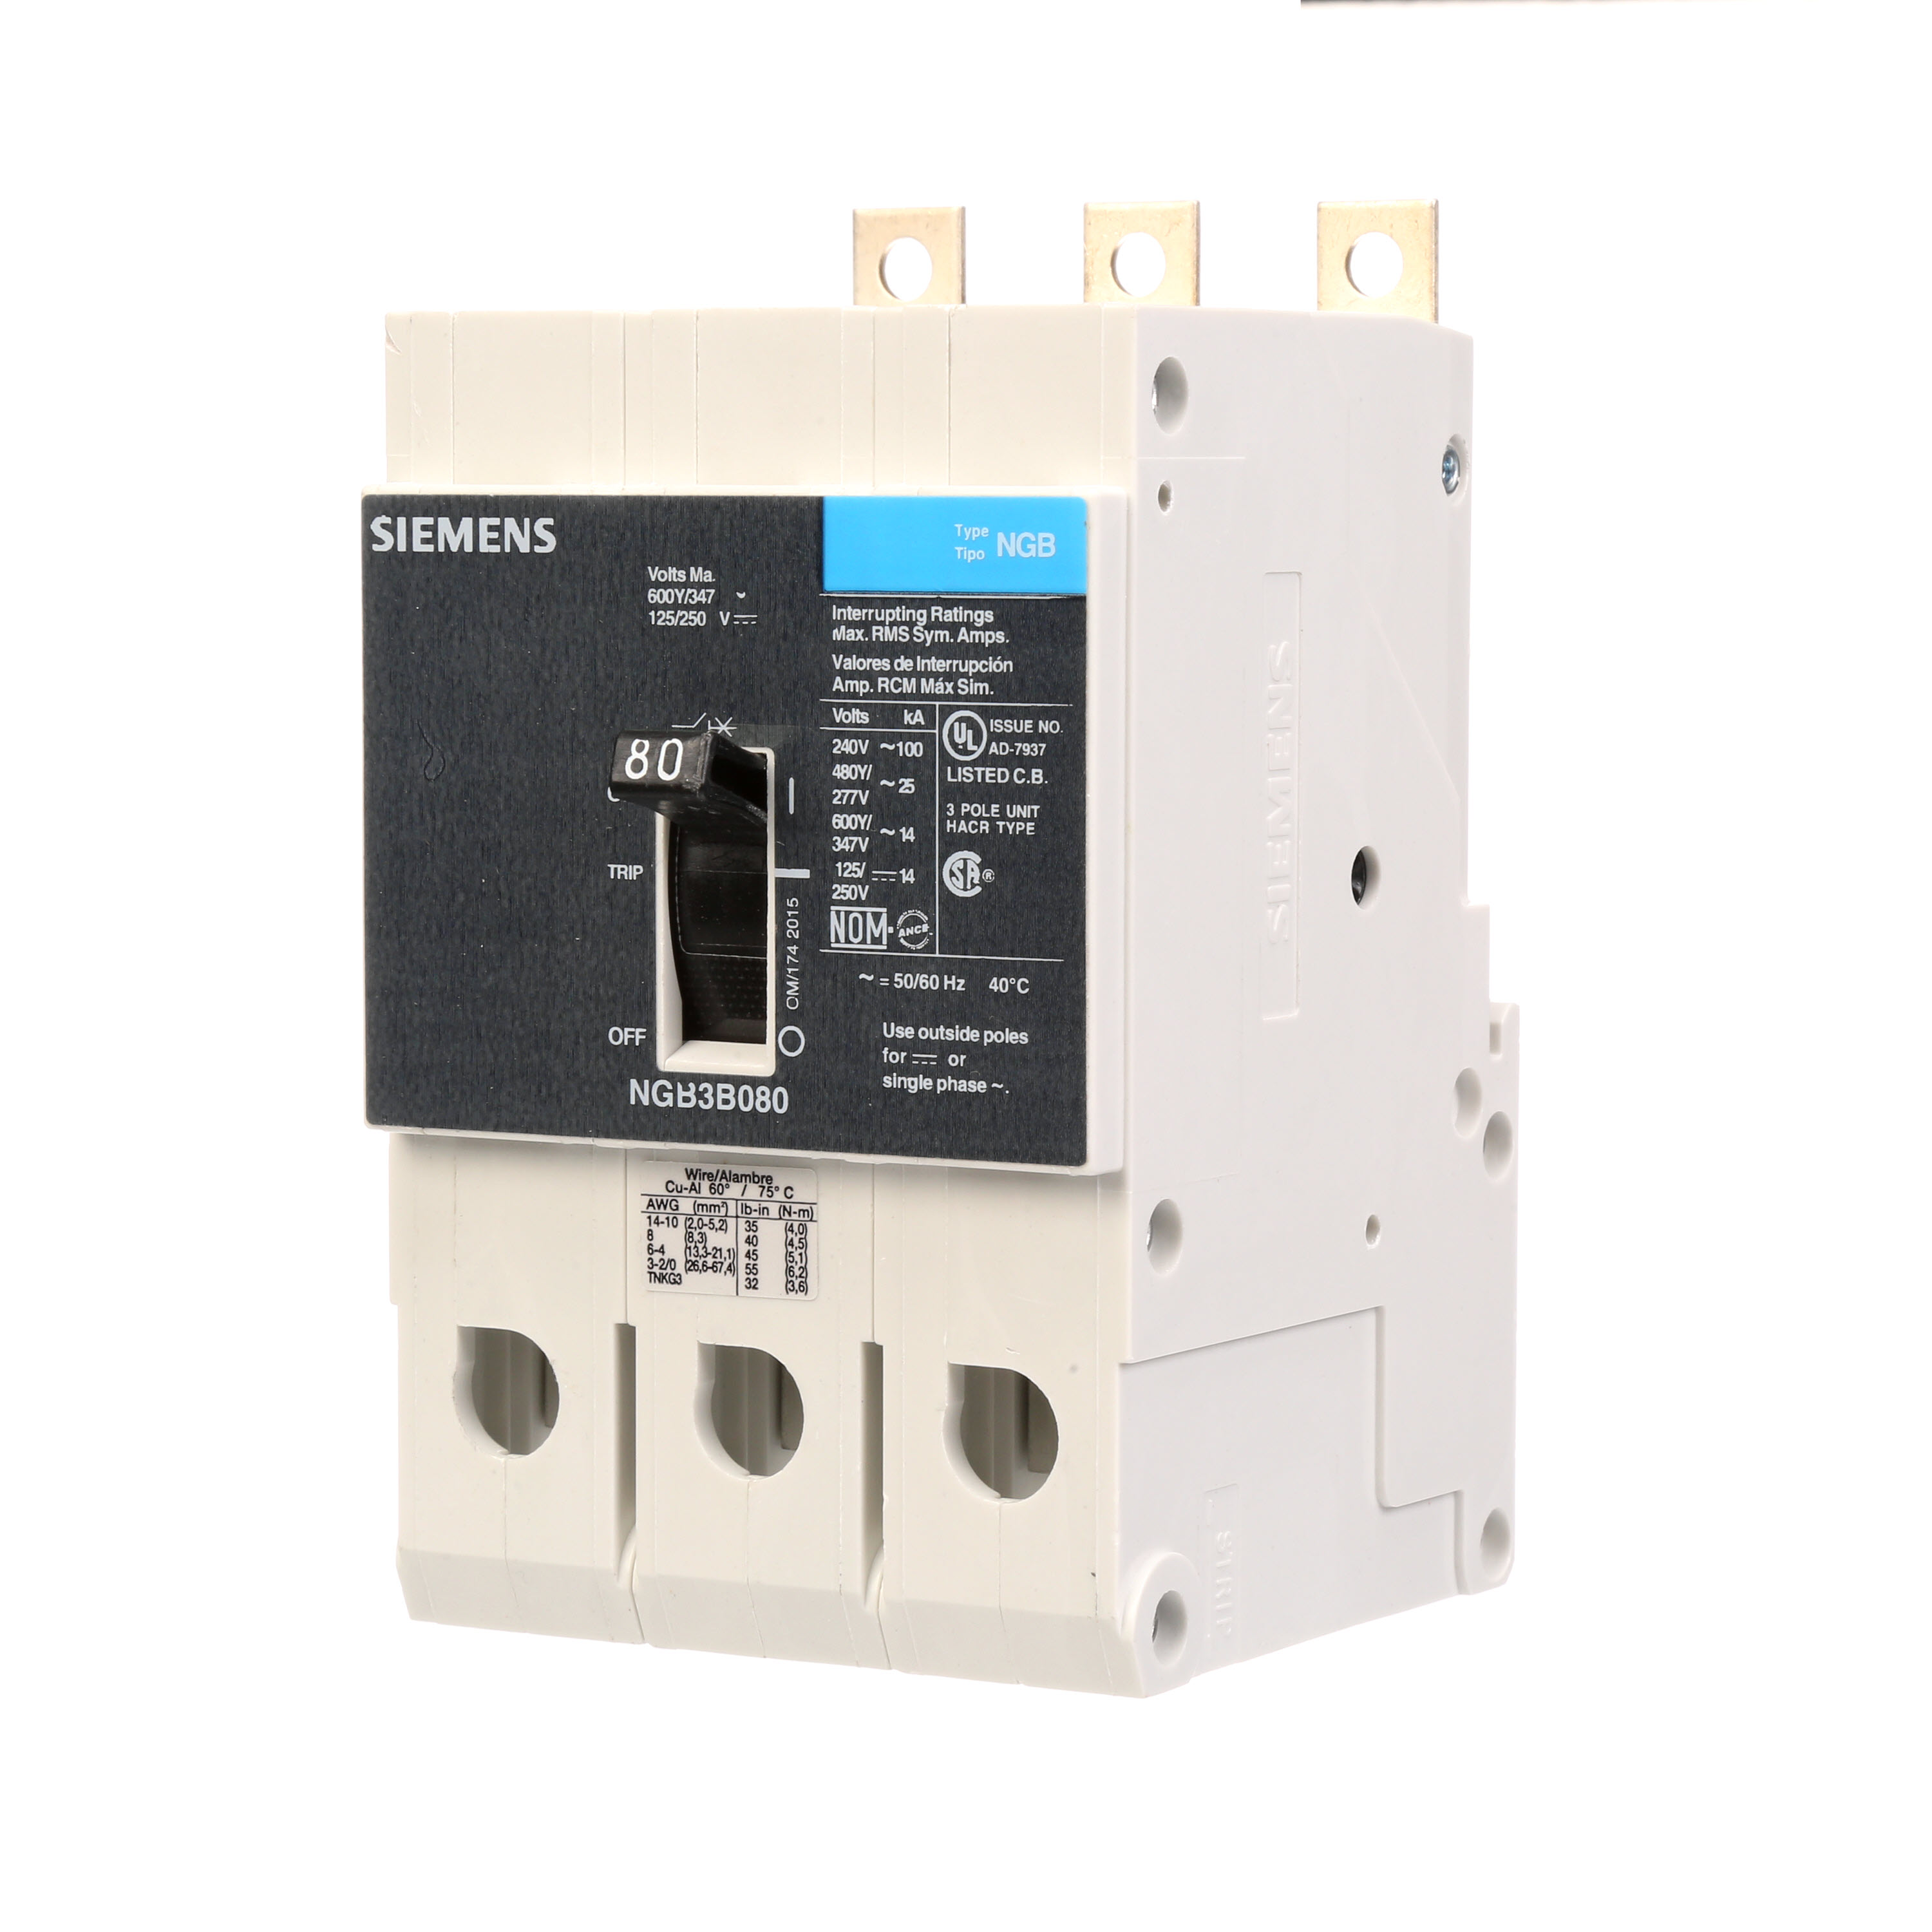 SIEMENS LOW VOLTAGE PANELBOARD MOUNT G FRAME CIRCUIT BREAKER WITH THERMAL - MAGNETIC TRIP. UL LISTED NGB FRAME WITH STANDARD BREAKING CAPACITY. 80A 3-POLE (14KAIC AT 600Y/347V) (25KAIC AT 480Y/277V). SPECIAL FEATURES MOUNTS ON PANELBOARD, NO LUGS, VALUE PACK. DIMENSIONS (W x H x D) IN 3 x 5.4 x 2.8.